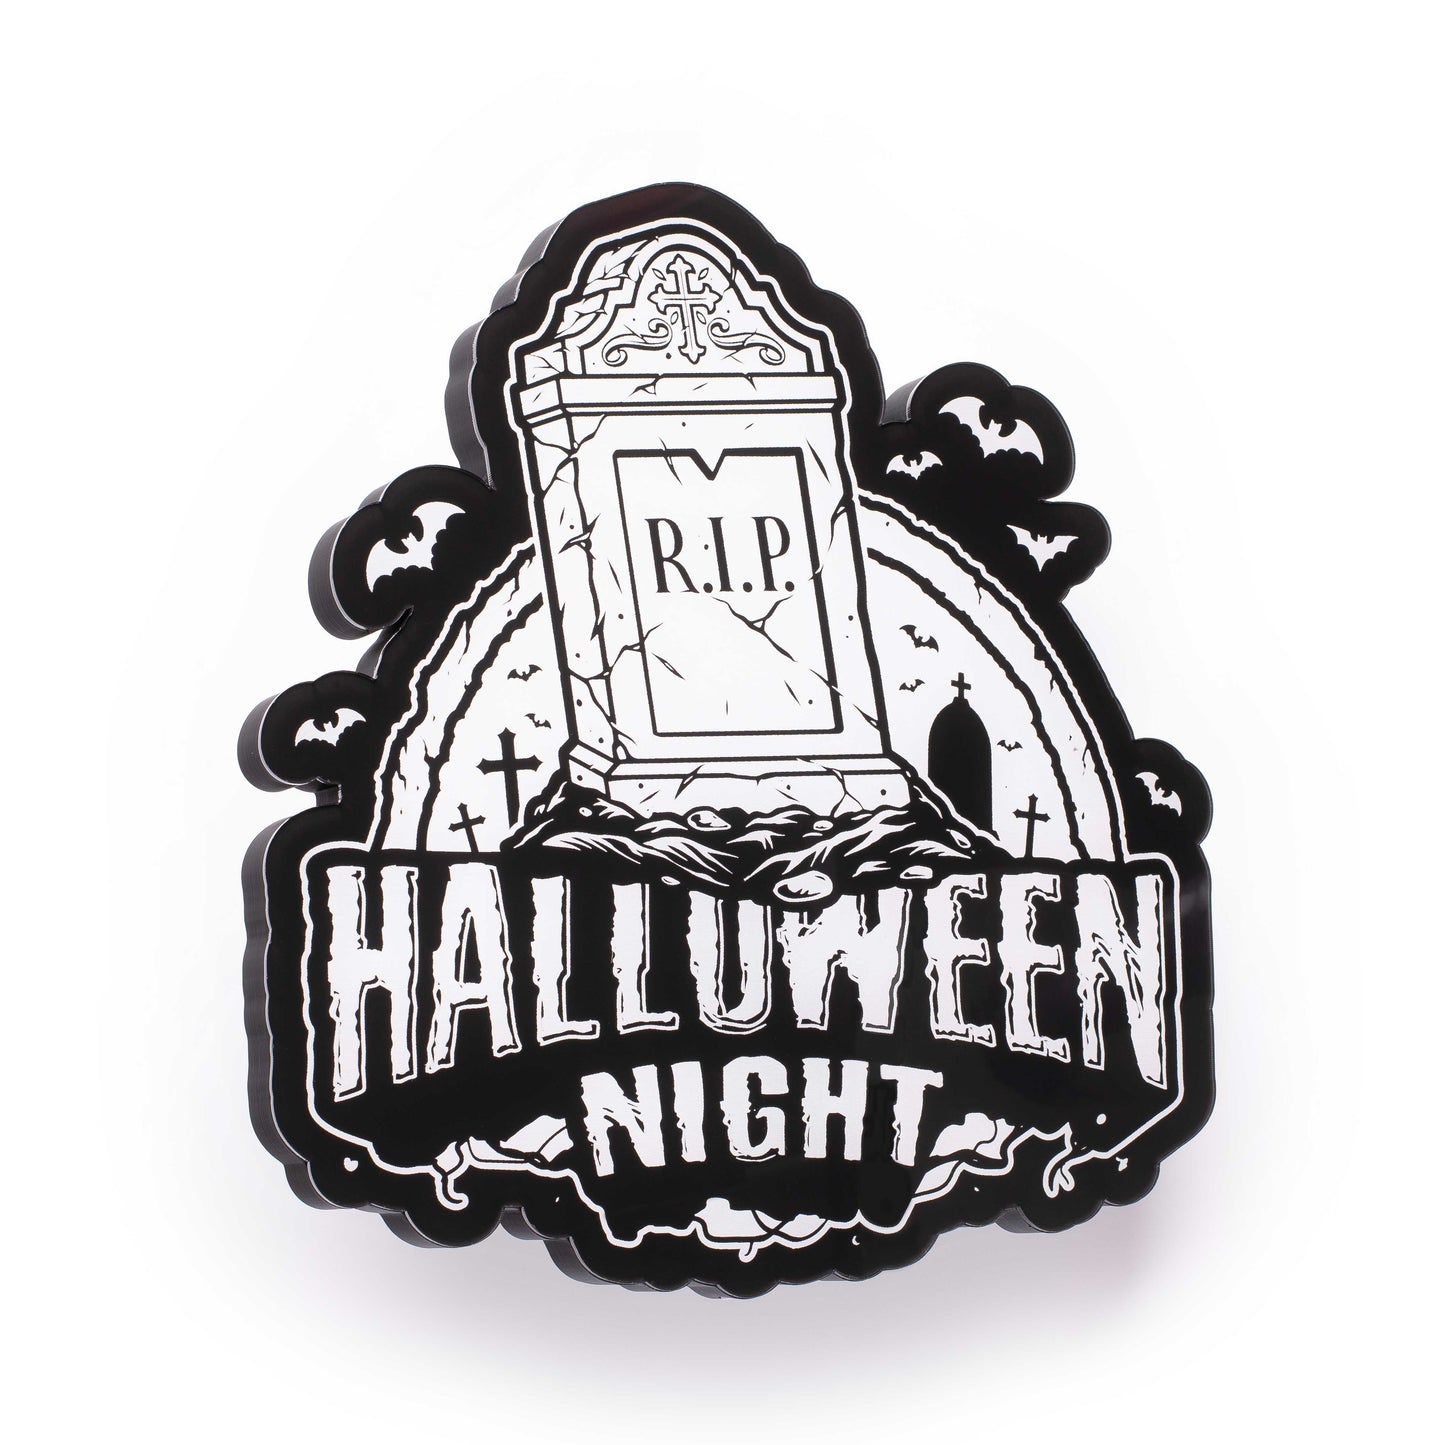 a 3d wall mounted acrylic light, featuring a cartoon style scary halloween themed illustration. A scary tomb stone rises up from a haunted grave yard scene complete with bats and spooky halloween themed text that reads "halloween night". 